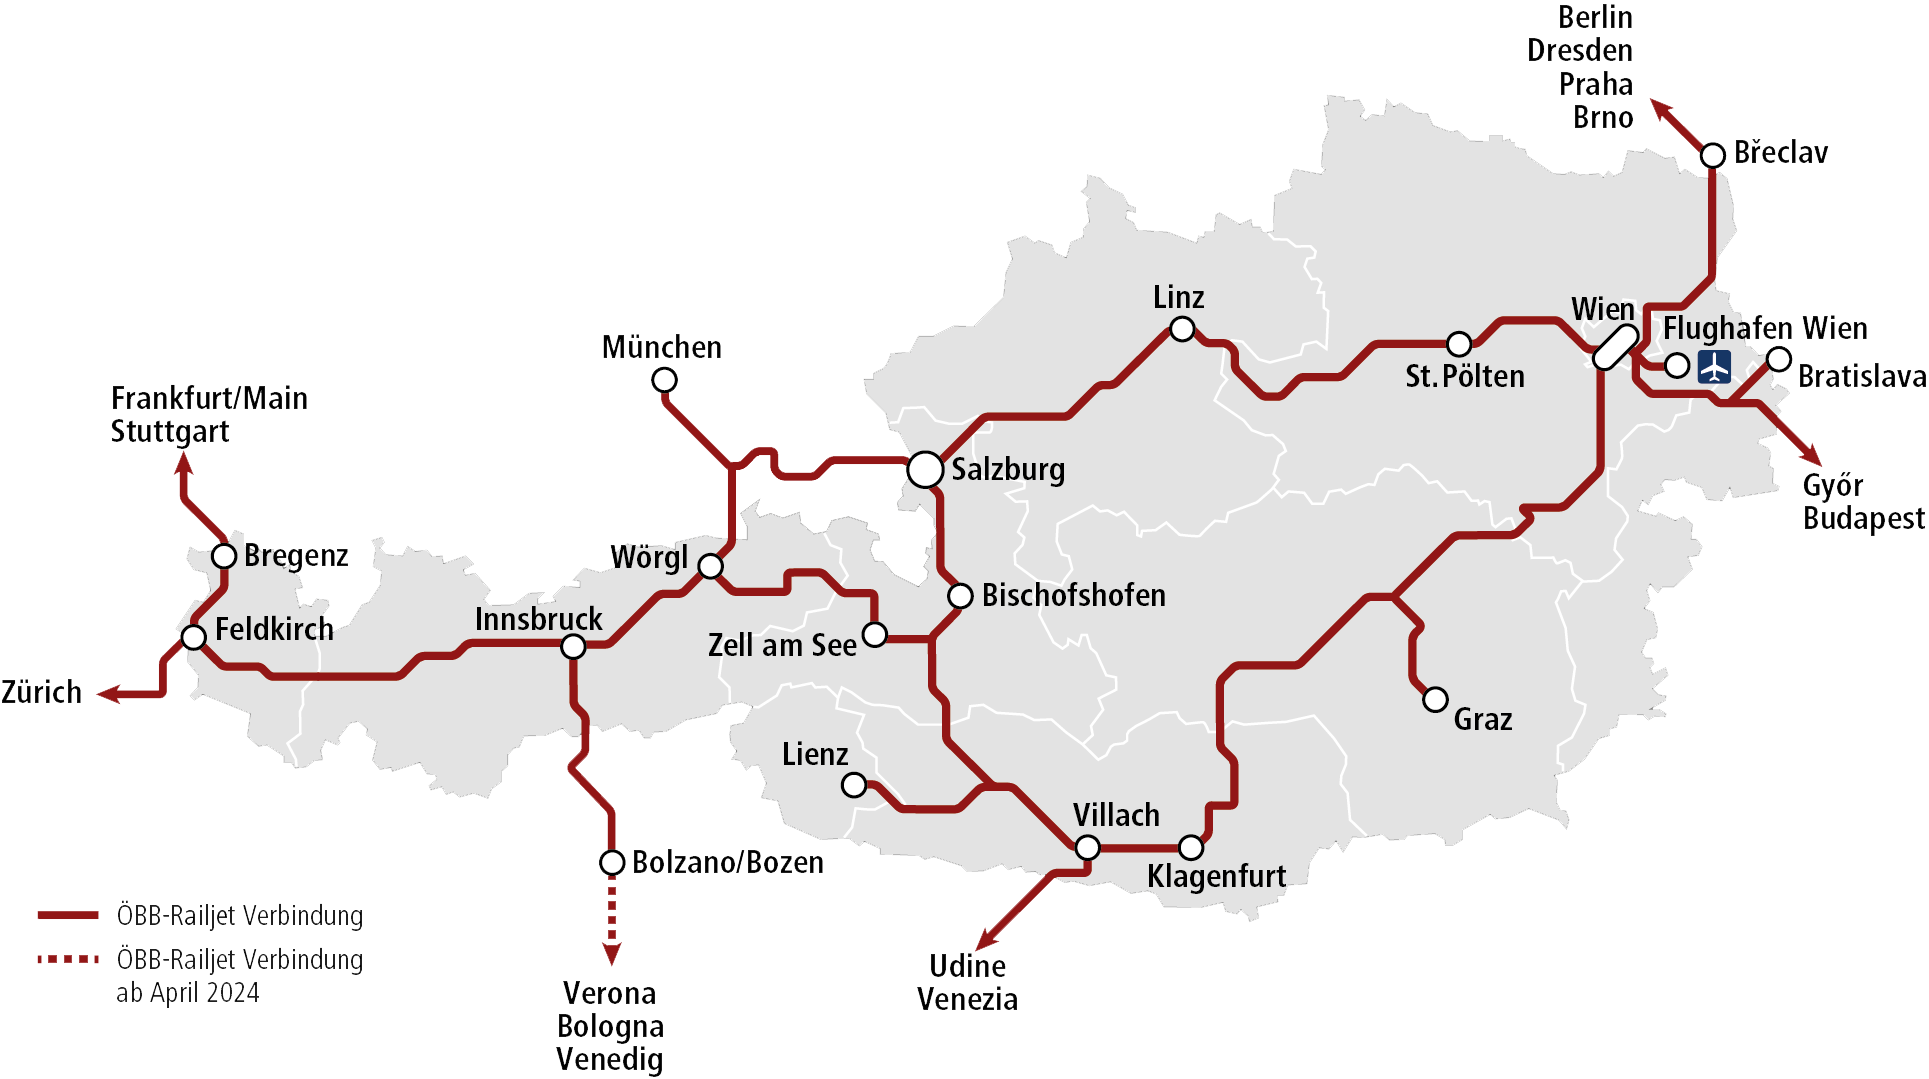 Overview of the route network of the ÖBB Railjet 